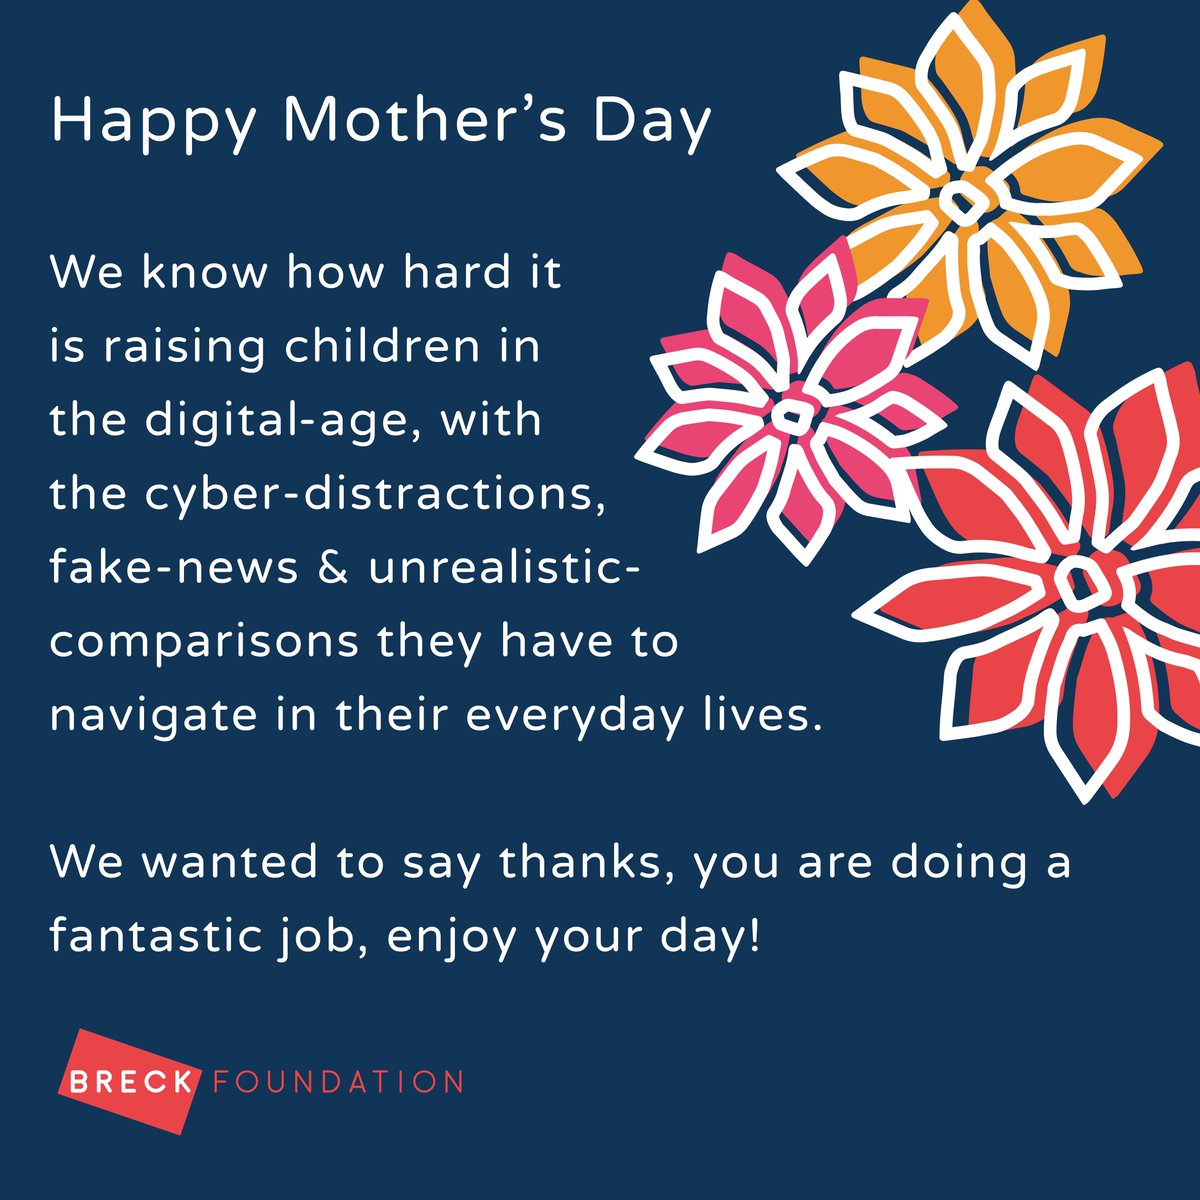 Feel free to share this to show your appreciation! #mothersday #motheringsunday #thanksmum #cybersafety #onlinesafety  #parenting #parents #noguilt #playvirtuallivereal #digitalgeneration